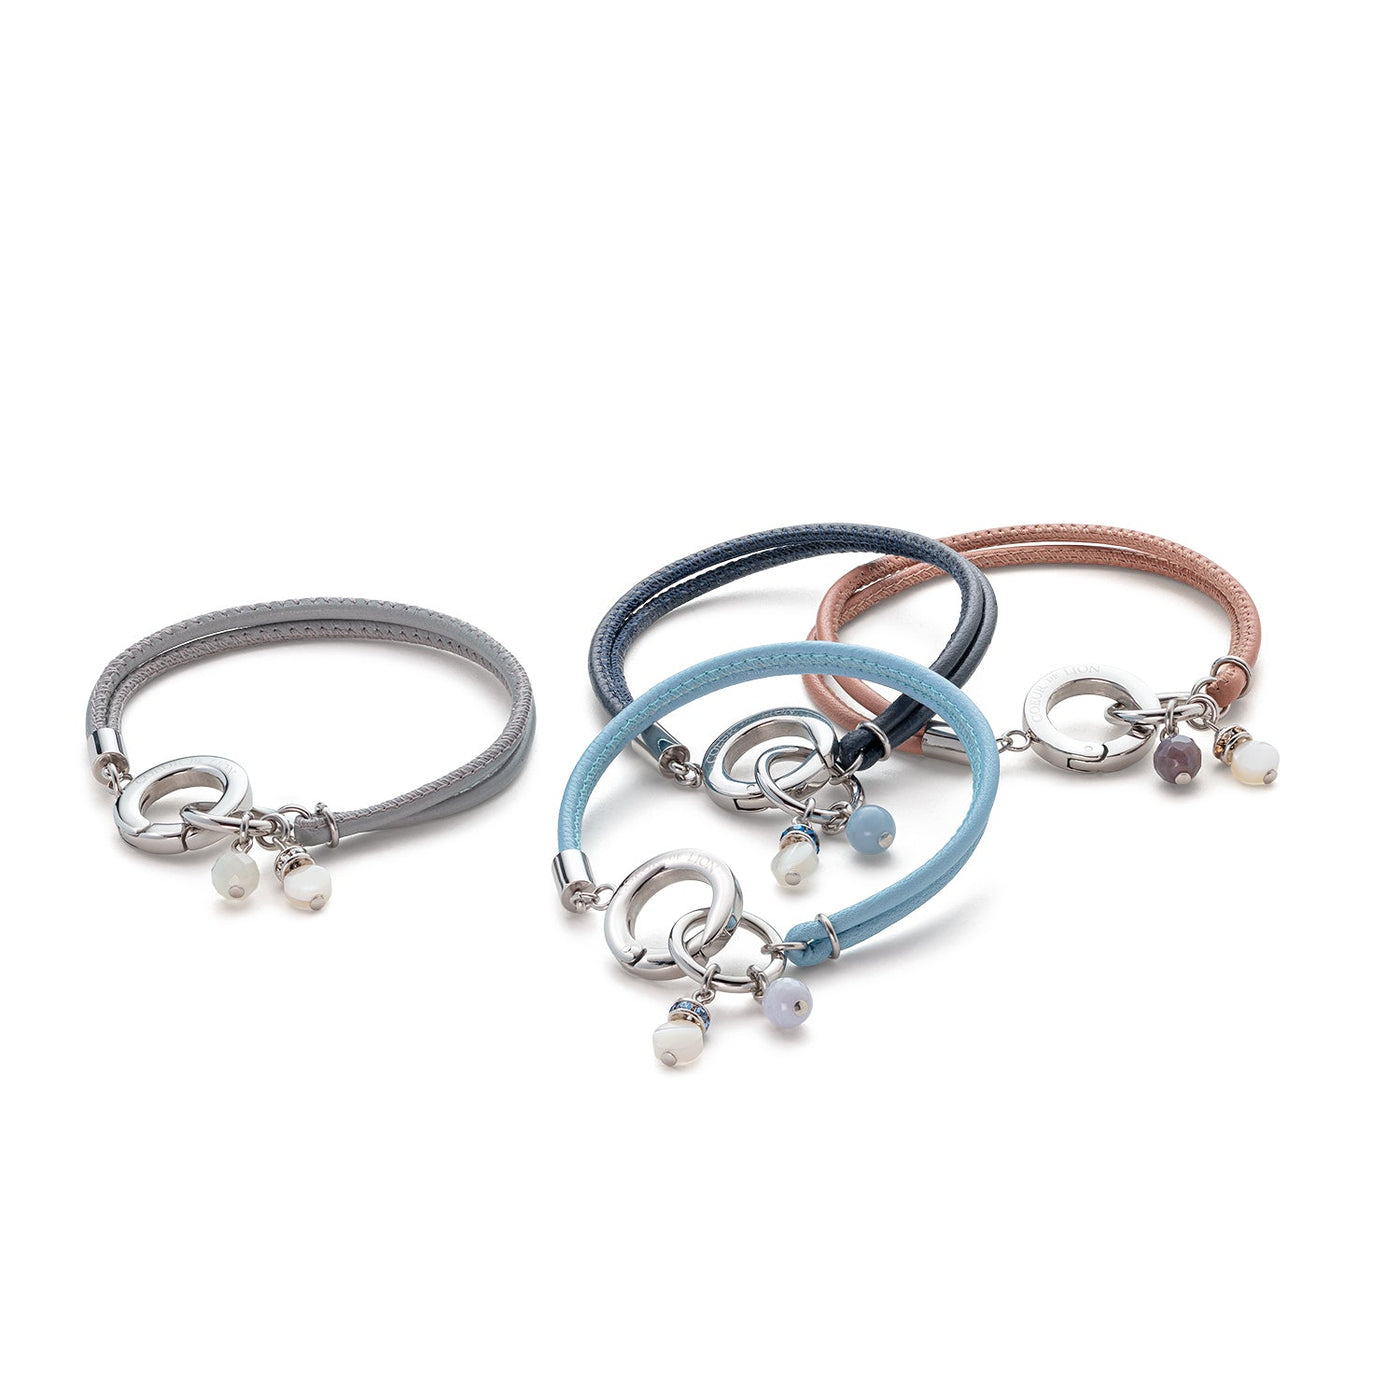 Coeur De Lion Leather bracelet with stainless steel & charms